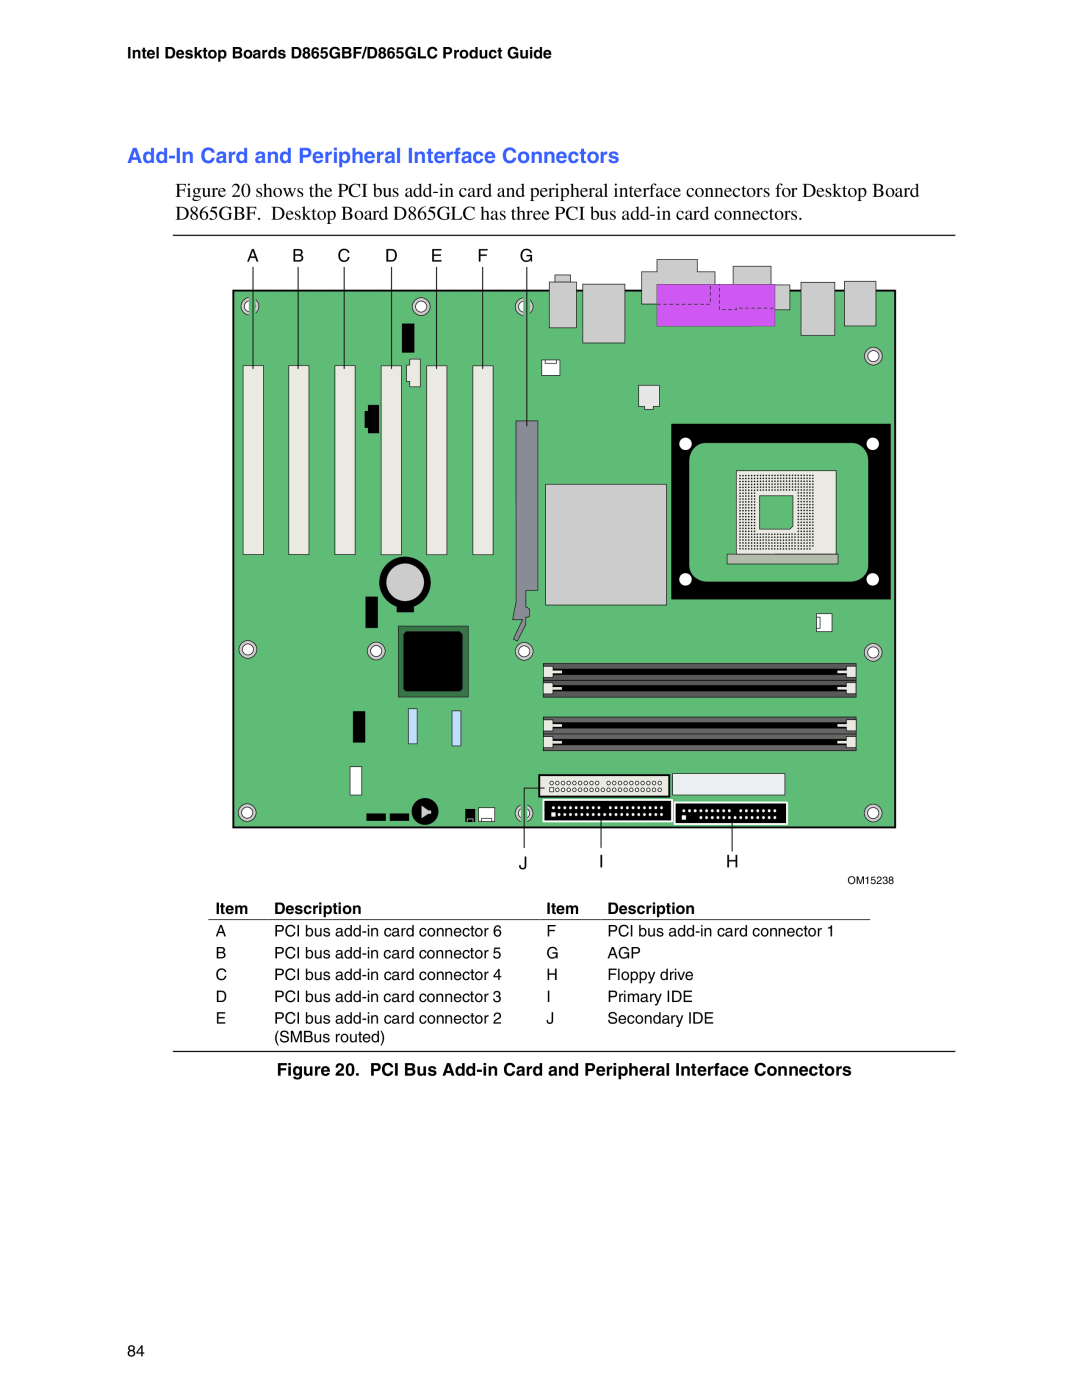 Intel D865GLC, D865GBF manual Add-InCard and Peripheral Interface Connectors 